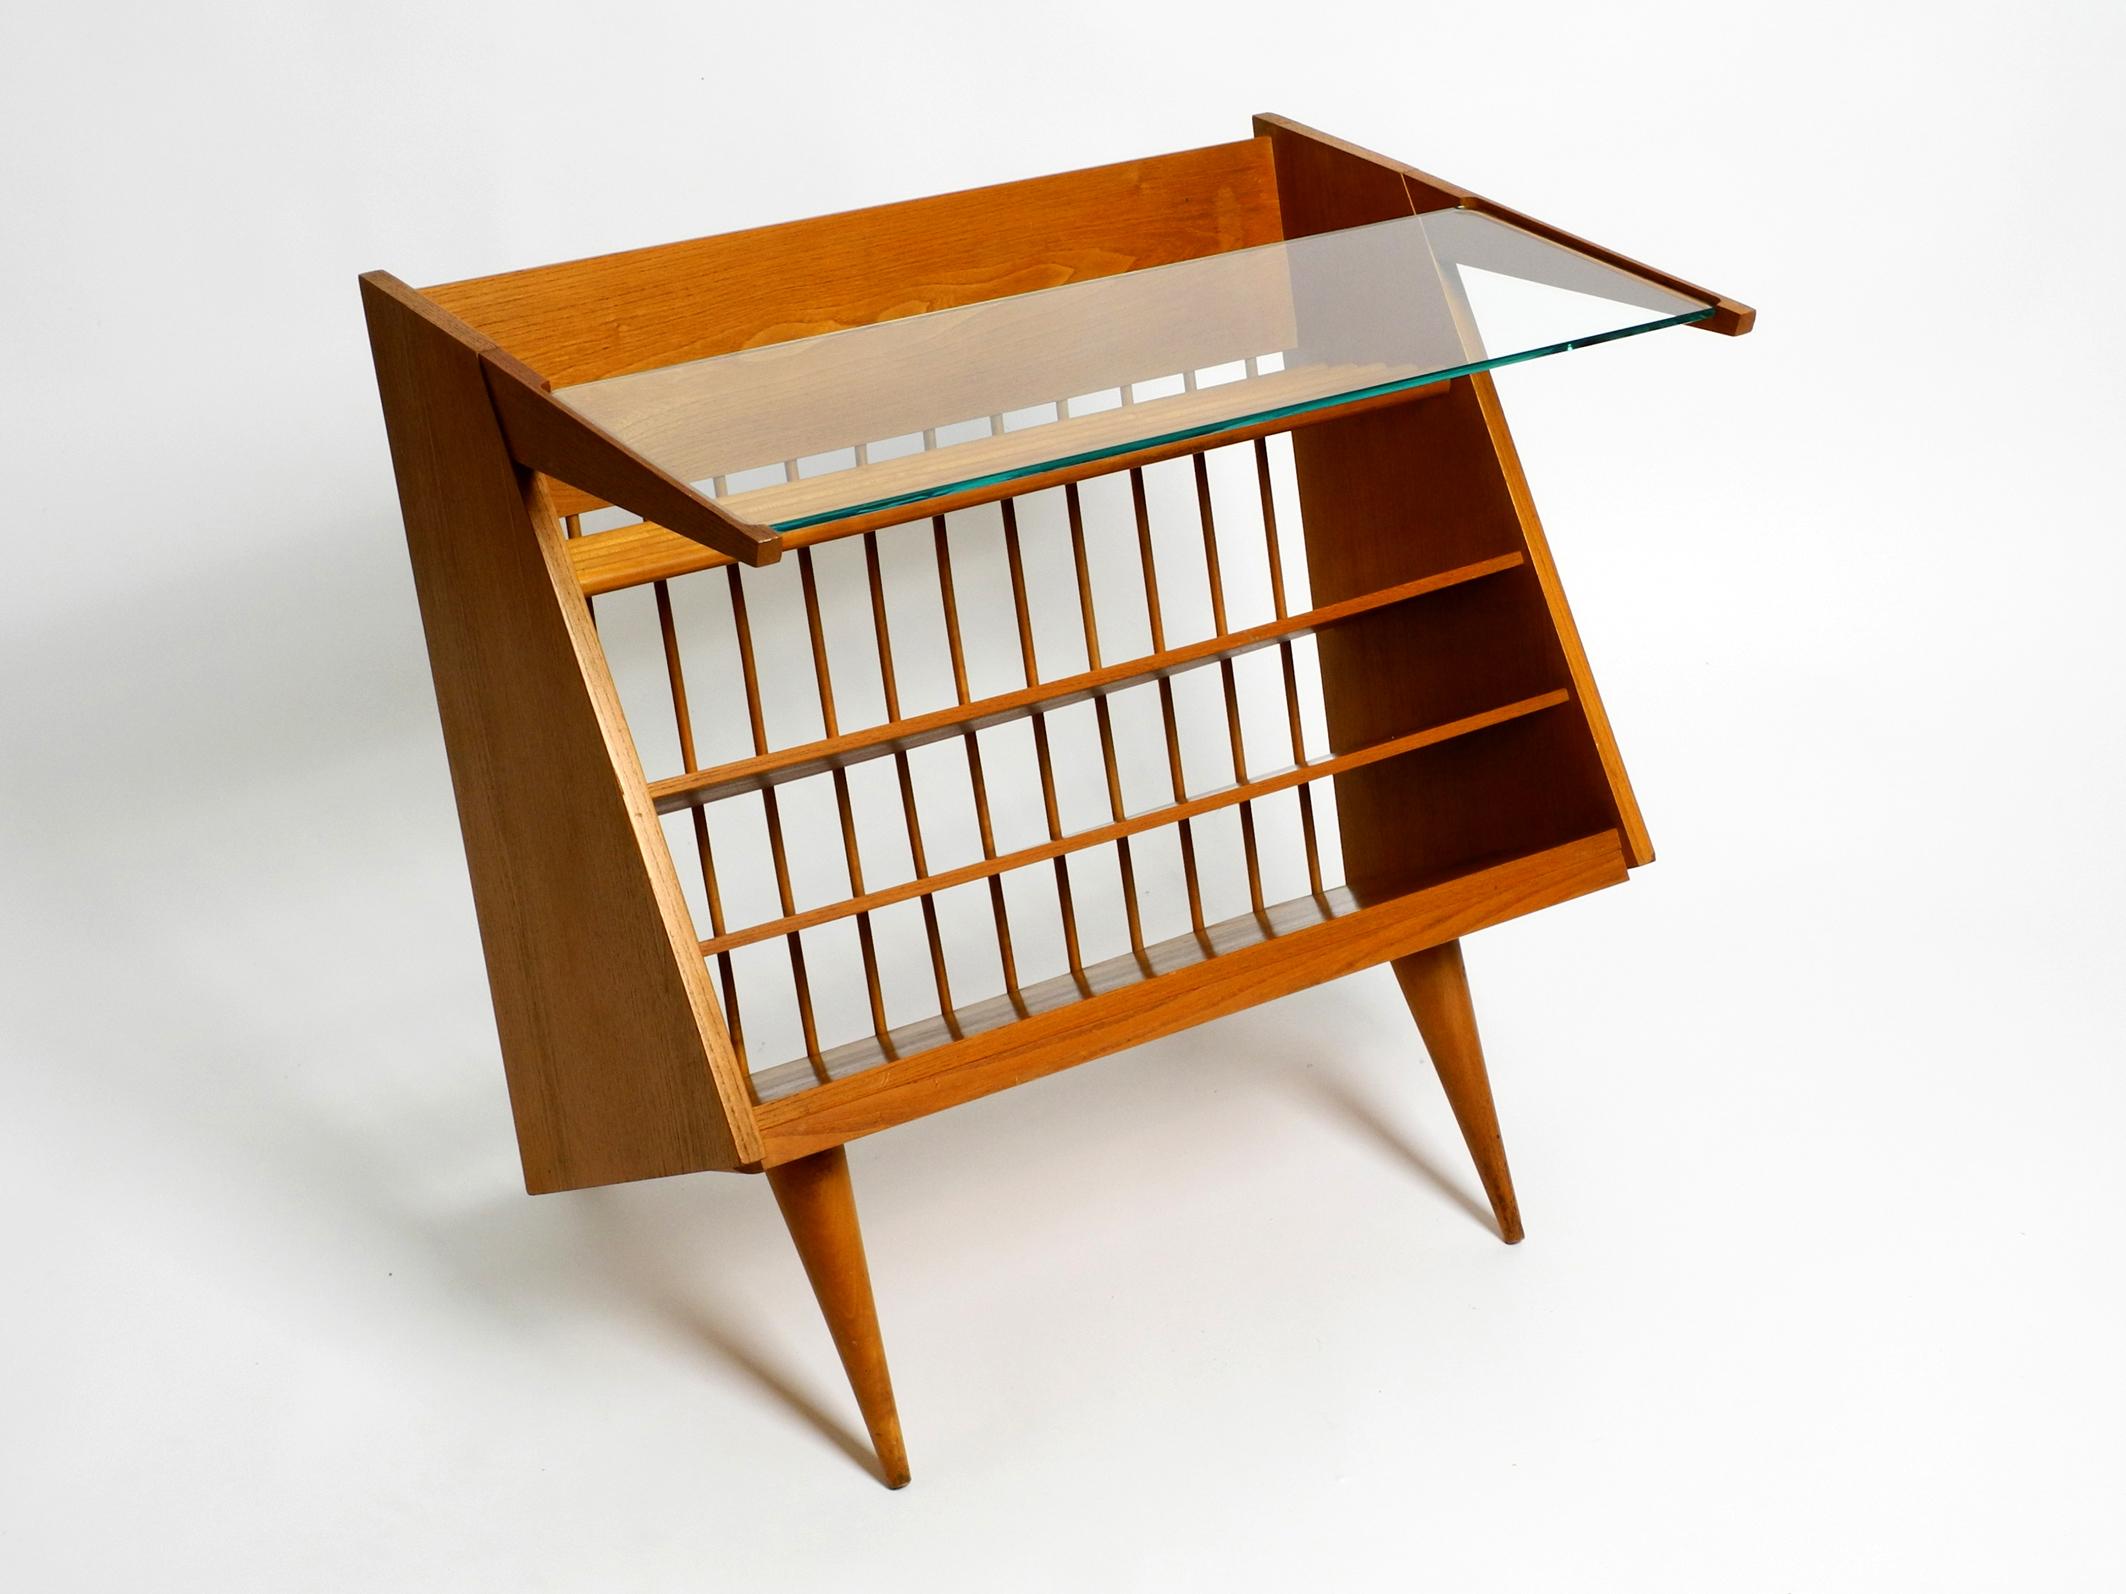 Very rare beautiful large mid-century side table with book and magazine rack made of ash wood and with one glass shelf. Great unusual futuristic 1950s design.
The entire cabinet is made of ash wood.
The detachable shelf is made of thick cut glass.